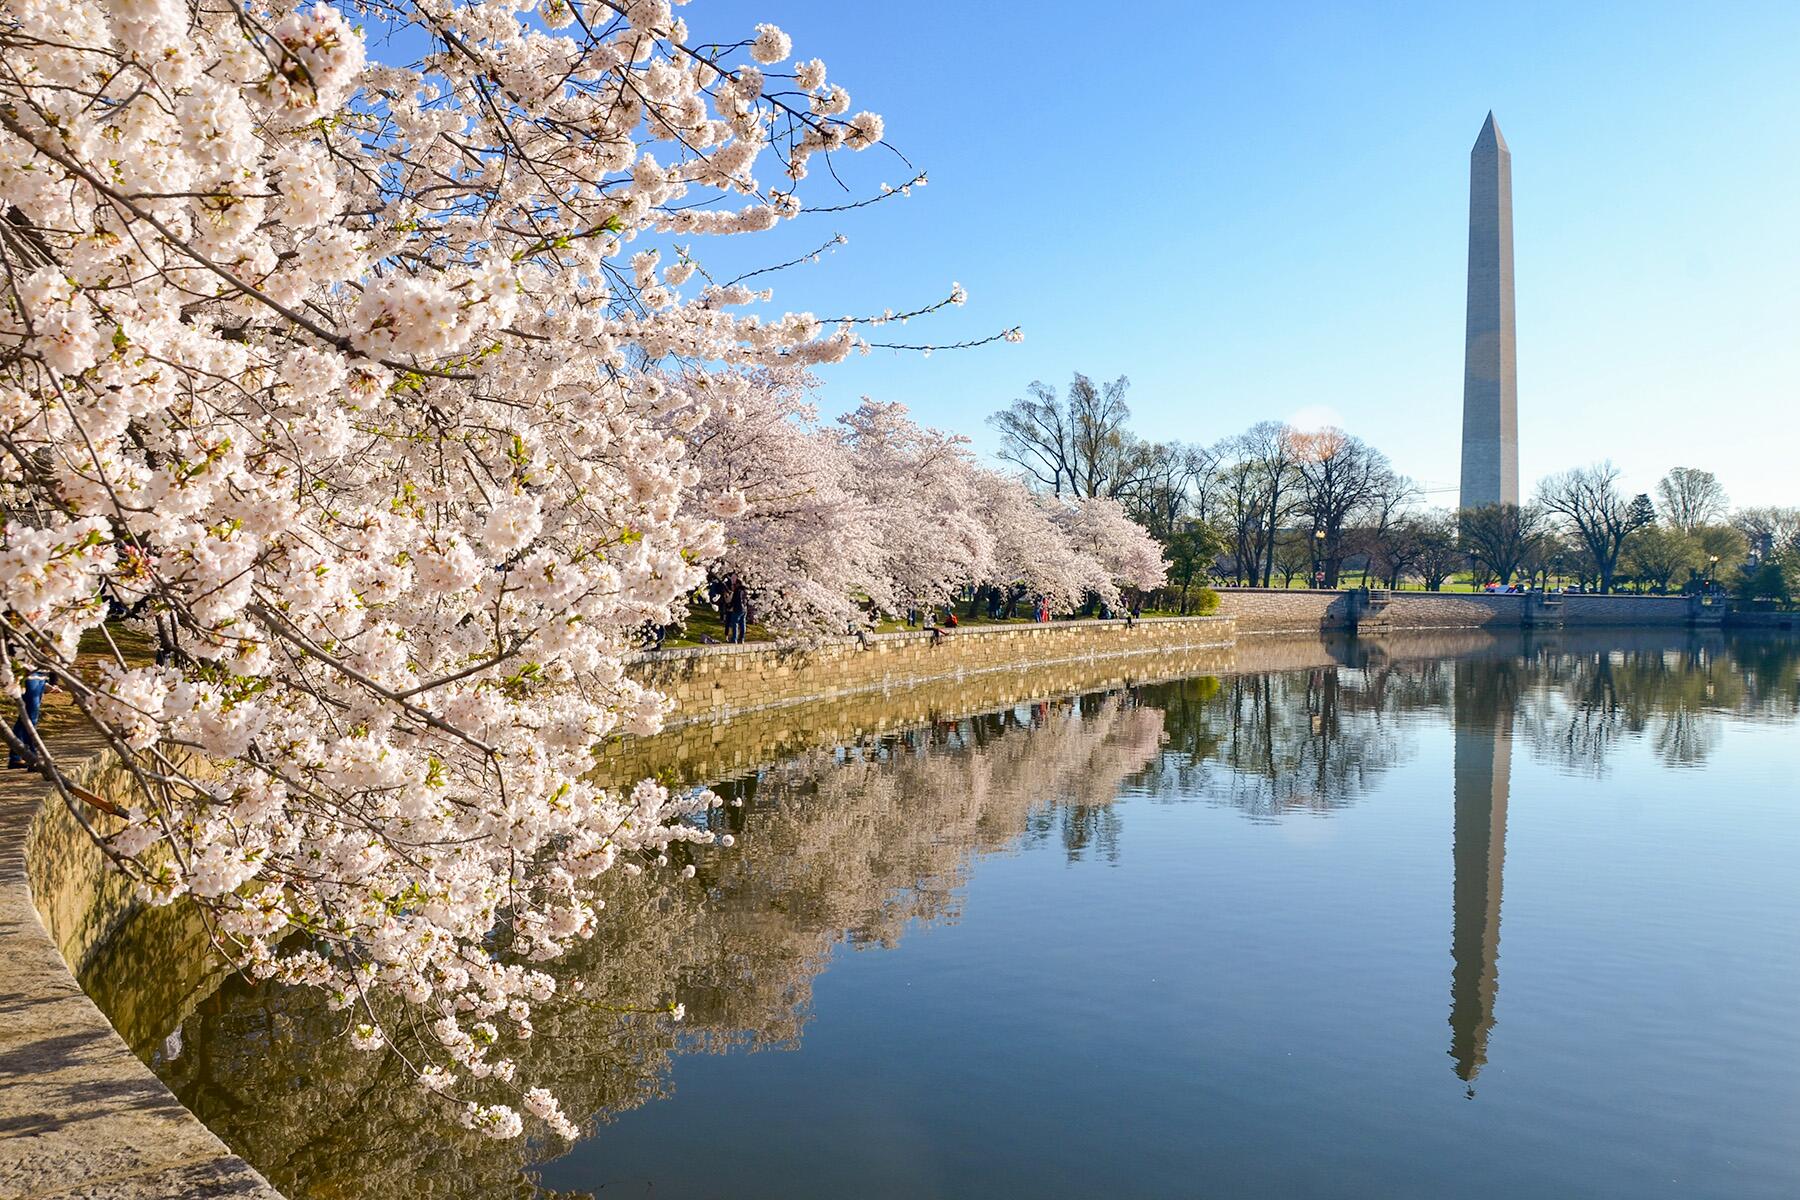 <a href='https://www.fodors.com/world/north-america/usa/washington-dc/experiences/news/photos/a-guide-to-the-best-under-the-radar-neighborhoods-in-washington-d-c#'>From &quot;10 Under-the-Radar Neighborhoods in Washington, D.C.&quot;</a>